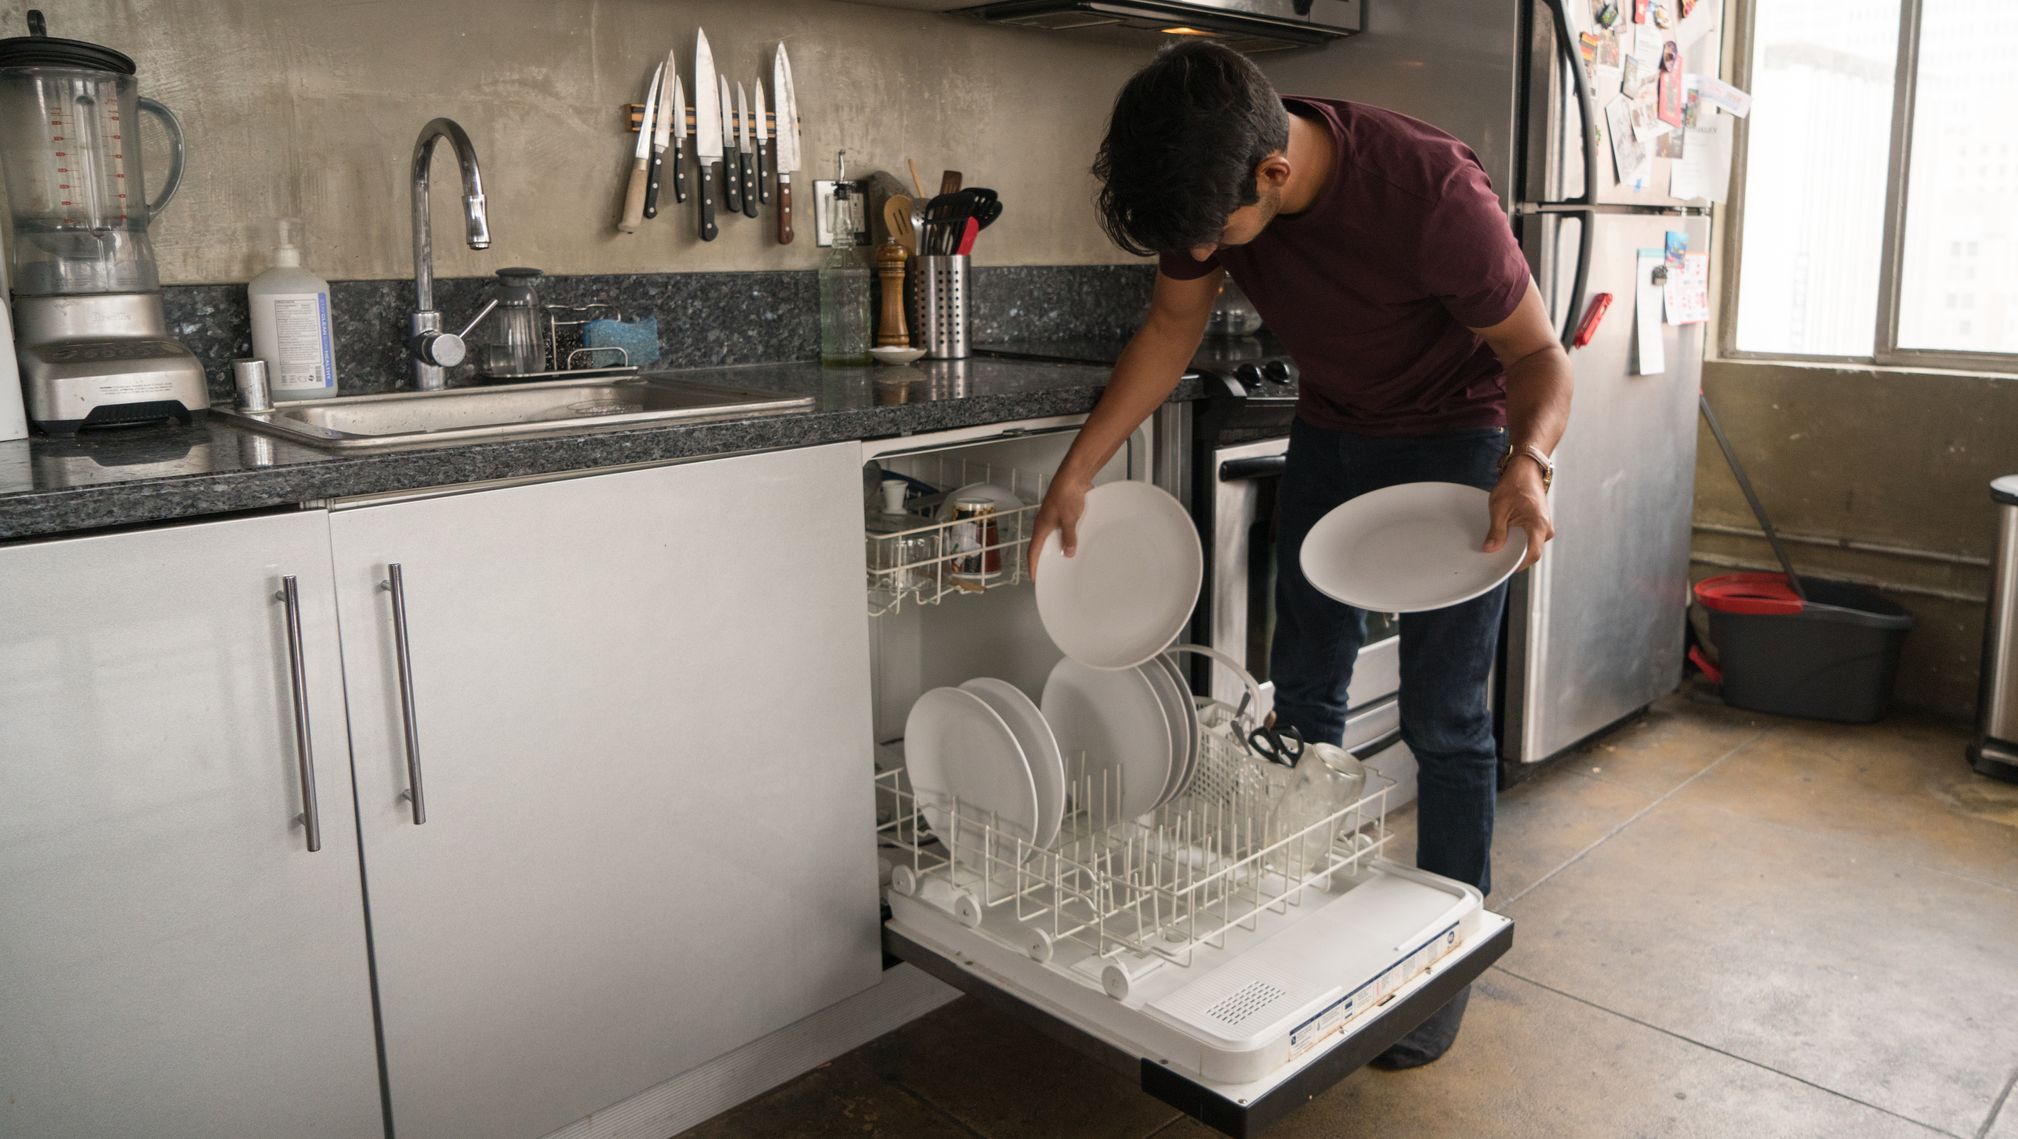 Young father putting dishes away